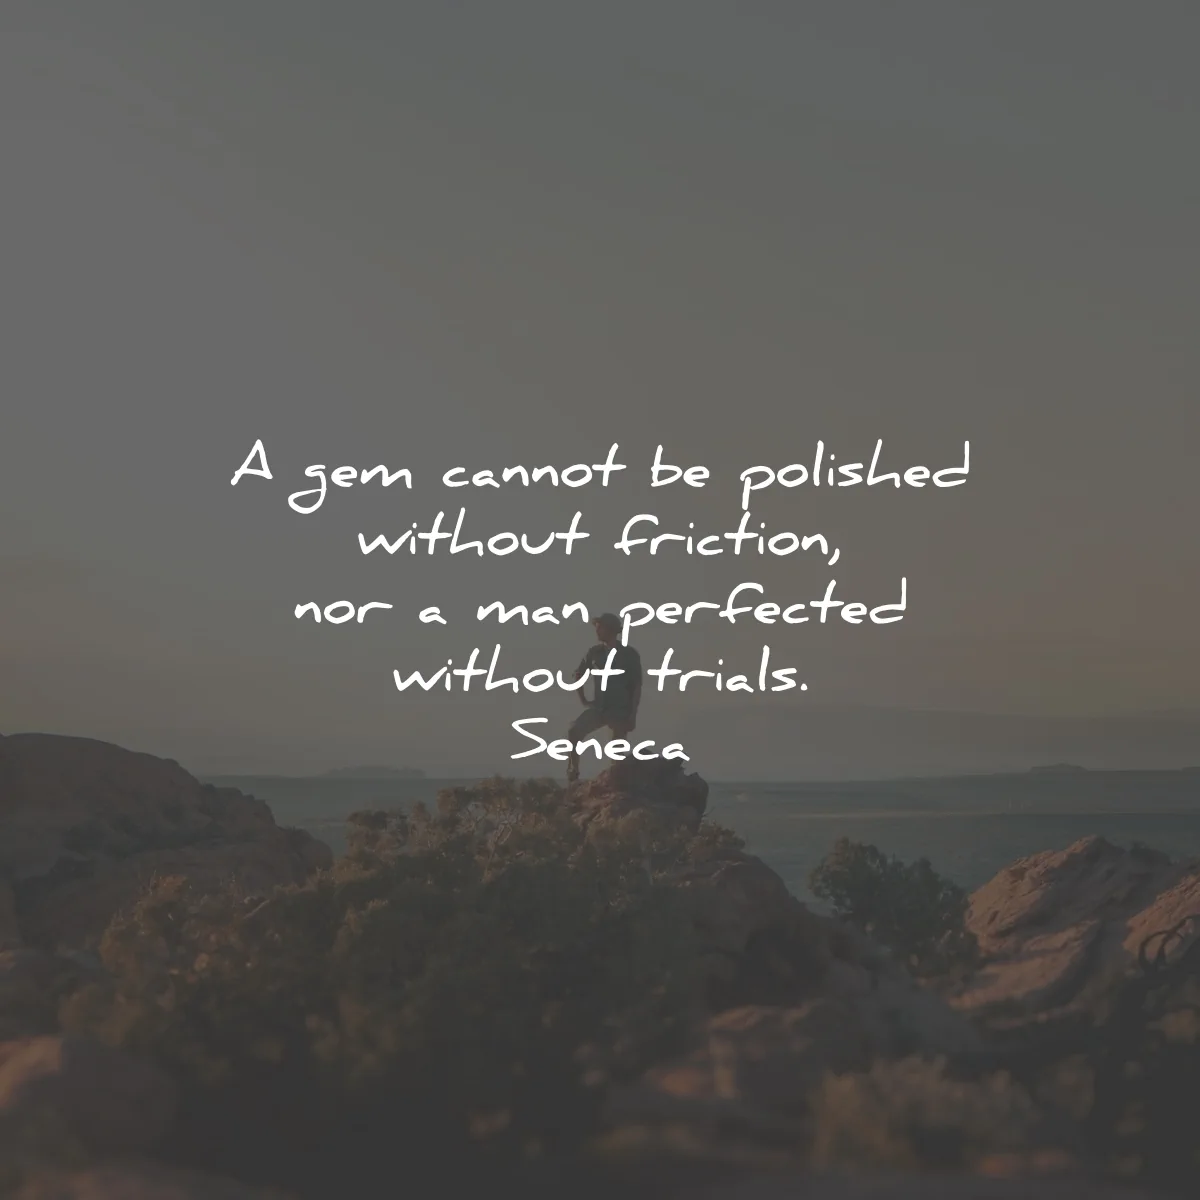 stoic quotes gem cannot be polished perfected trials seneca wisdom